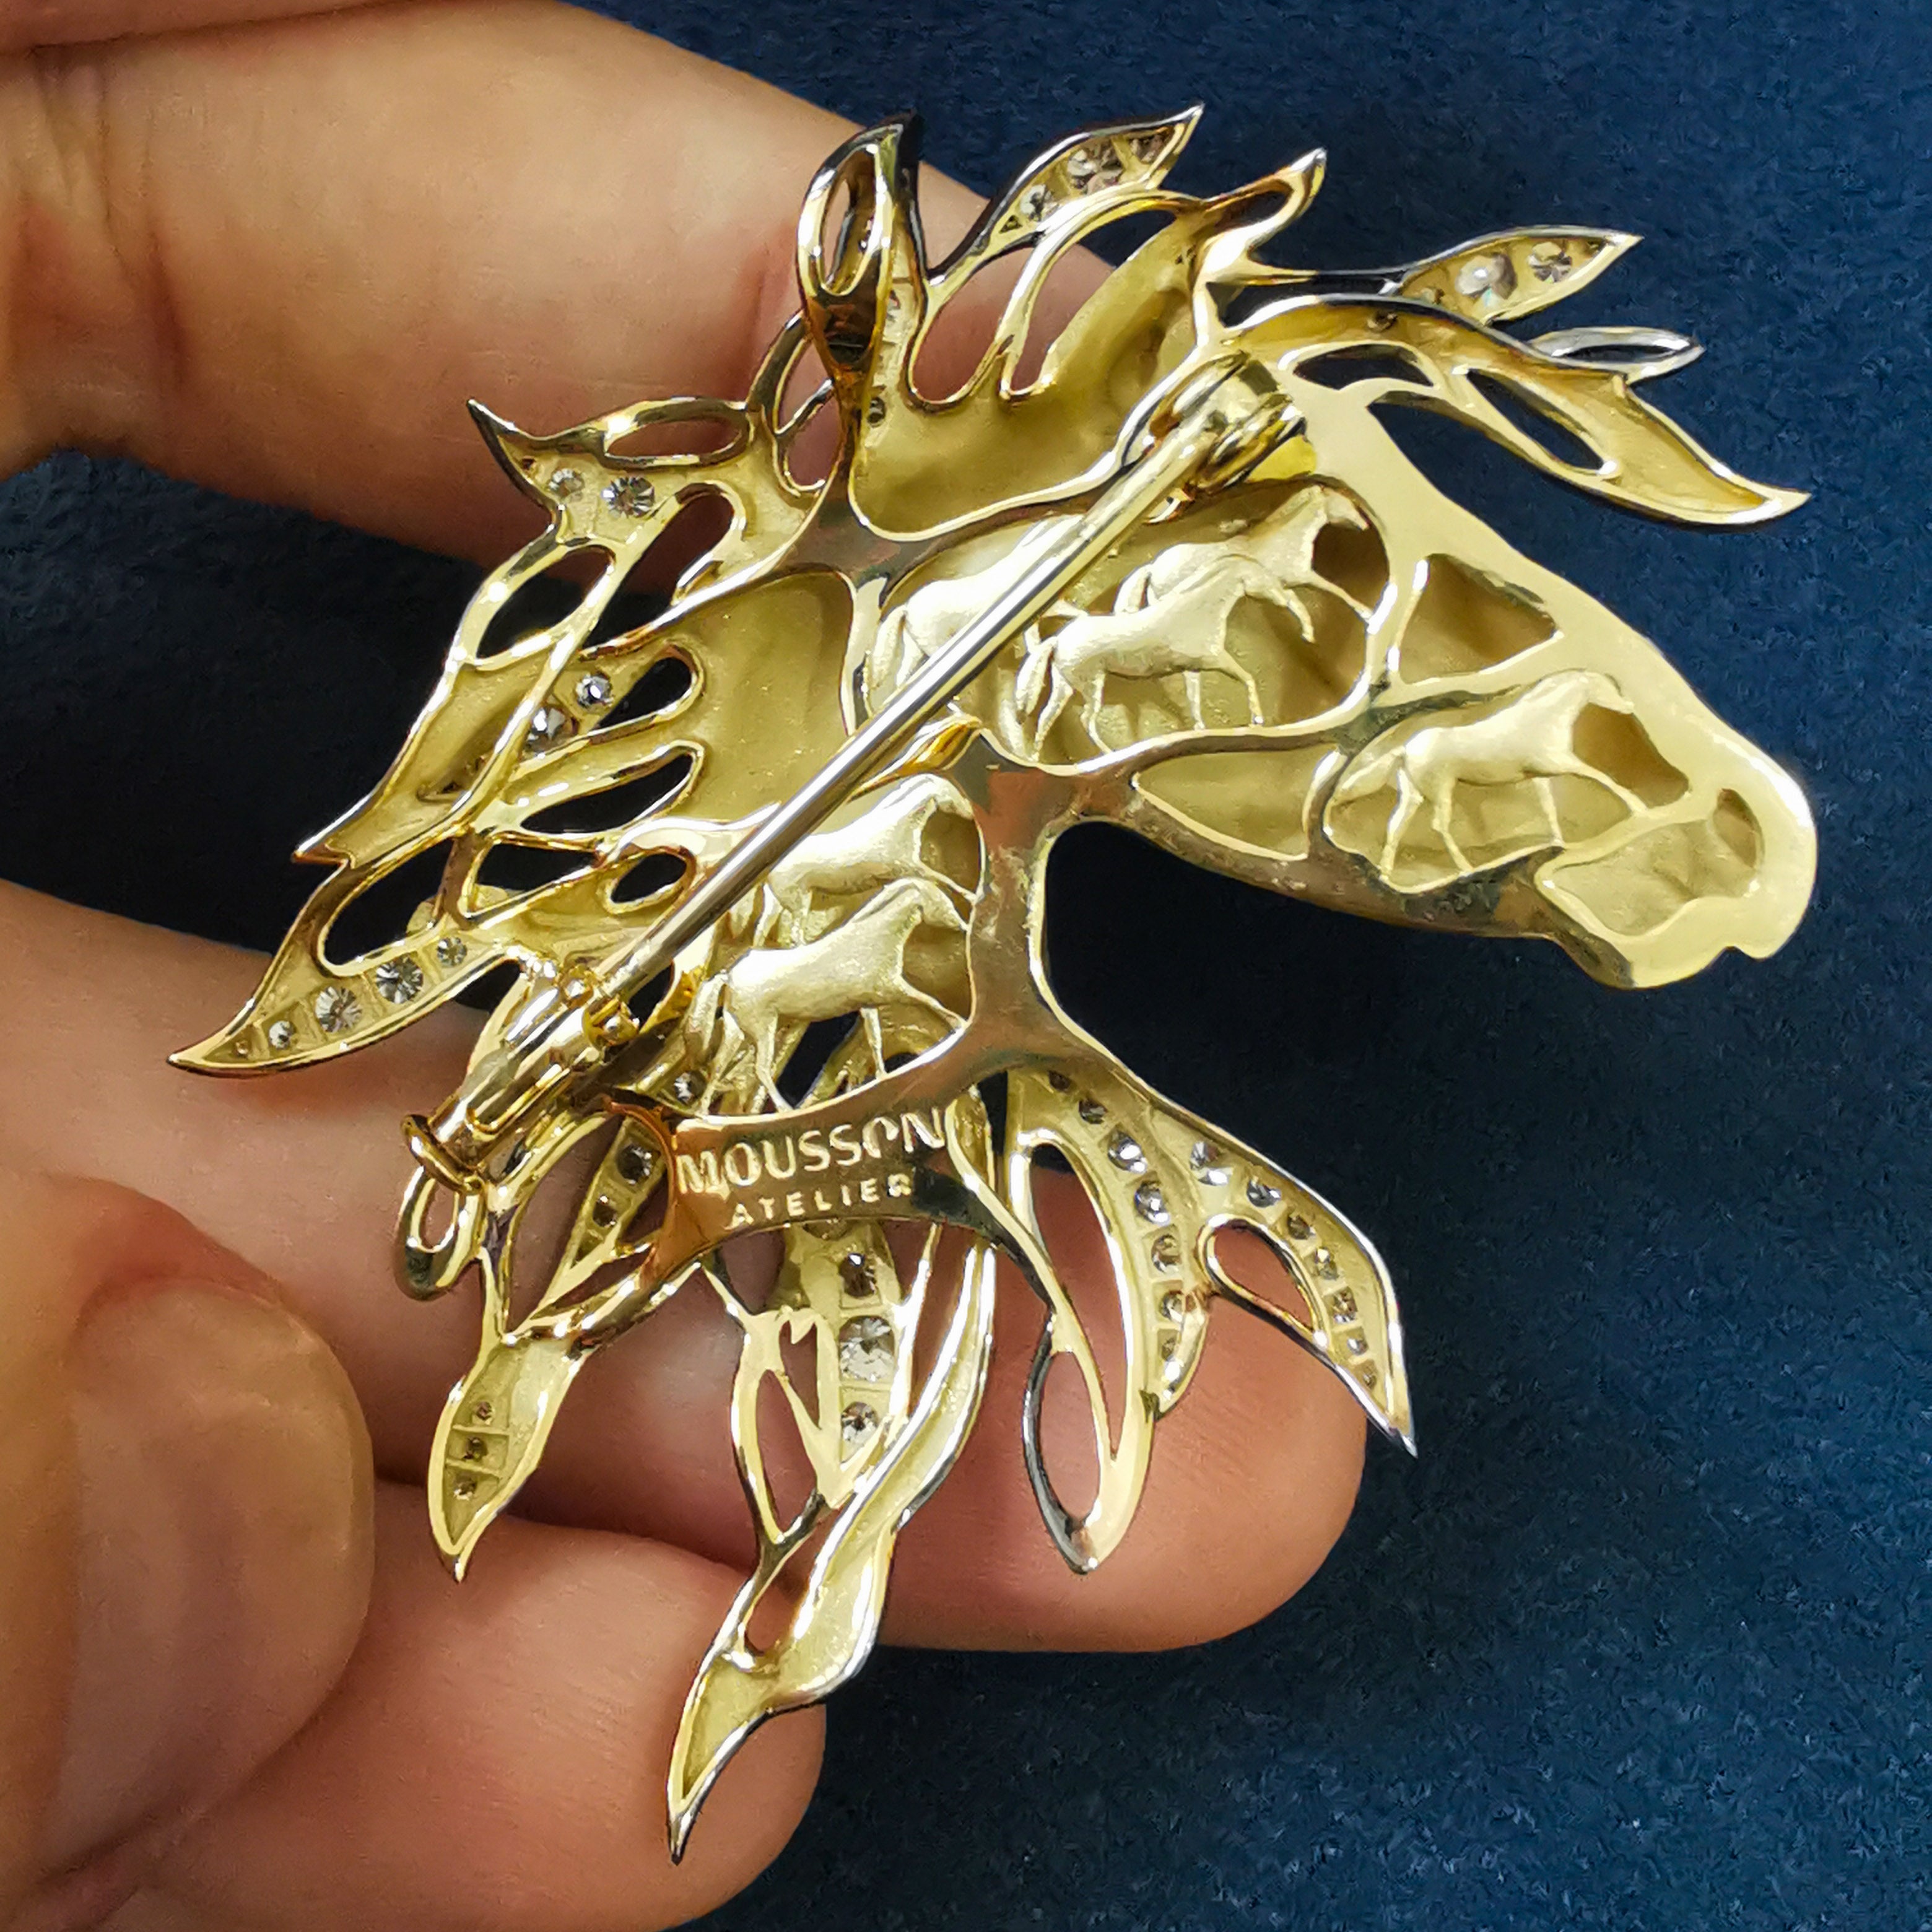 Brs 0231-0, 18K Yellow Gold, Champagne Diamonds Horse Head Brooch